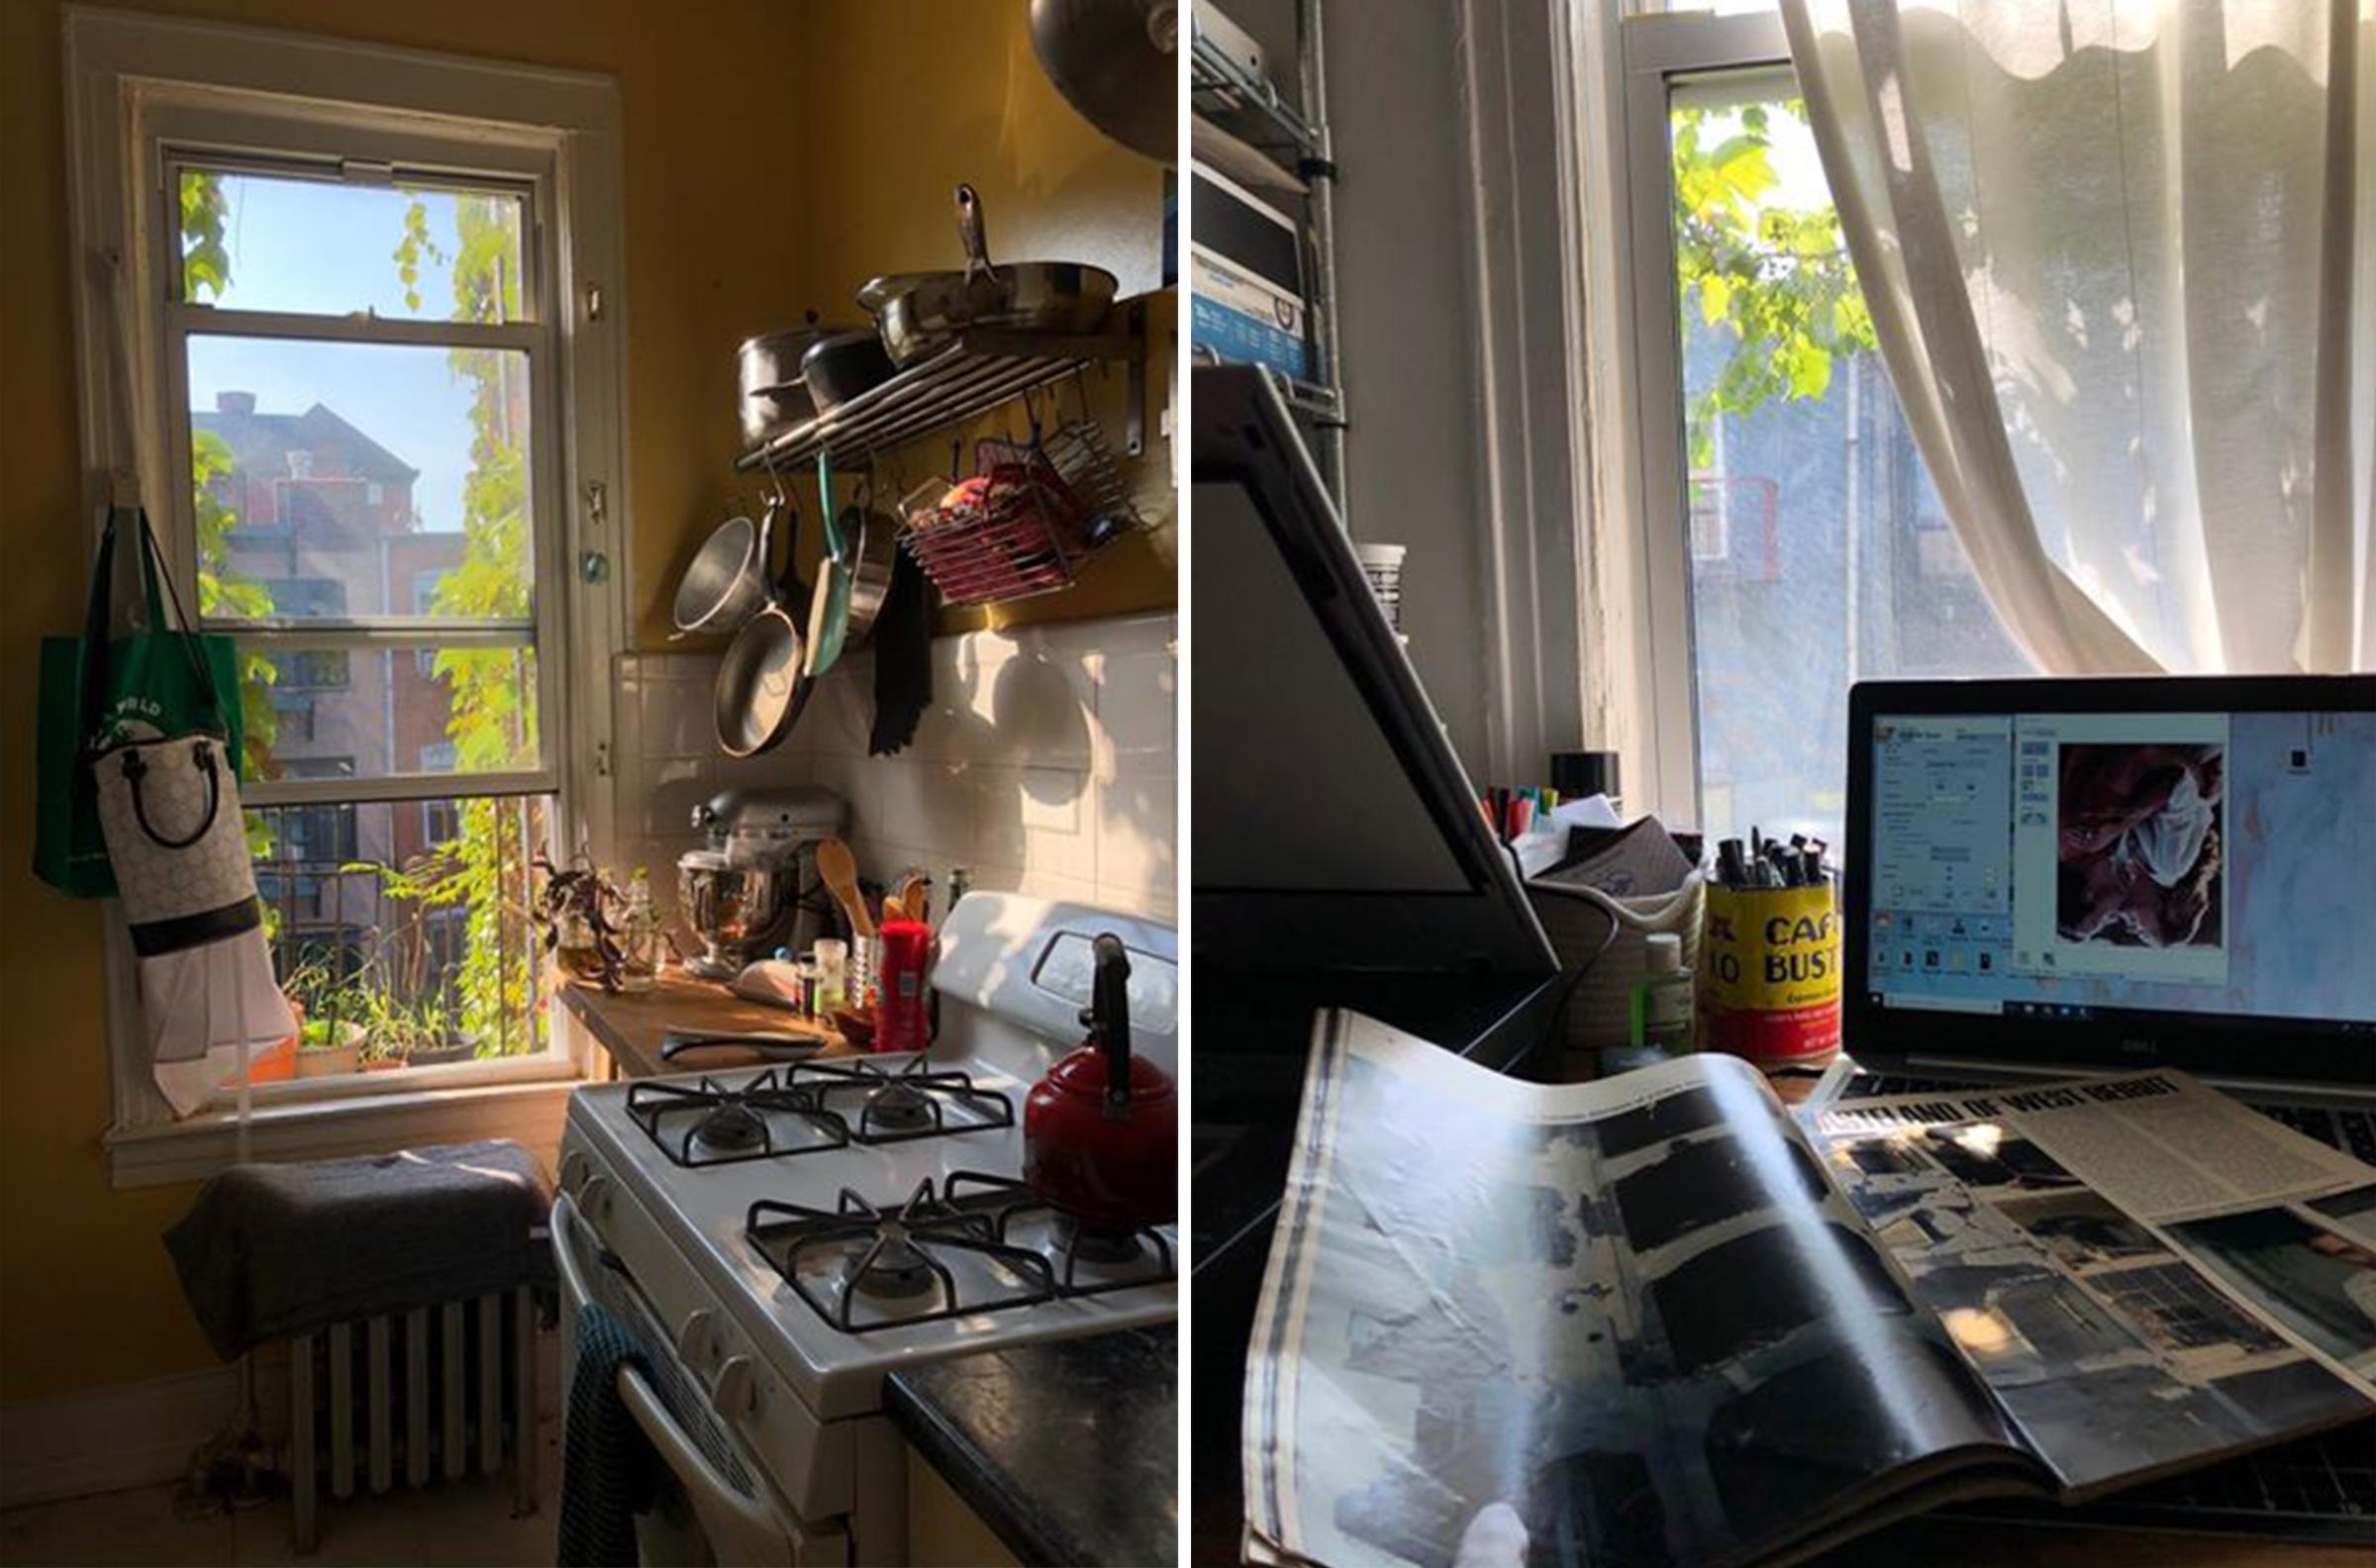 Sydney Ellison, a student at Pratt Institute in New York City, has been living in Brooklyn and studying remotely while classes remain virtual this fall